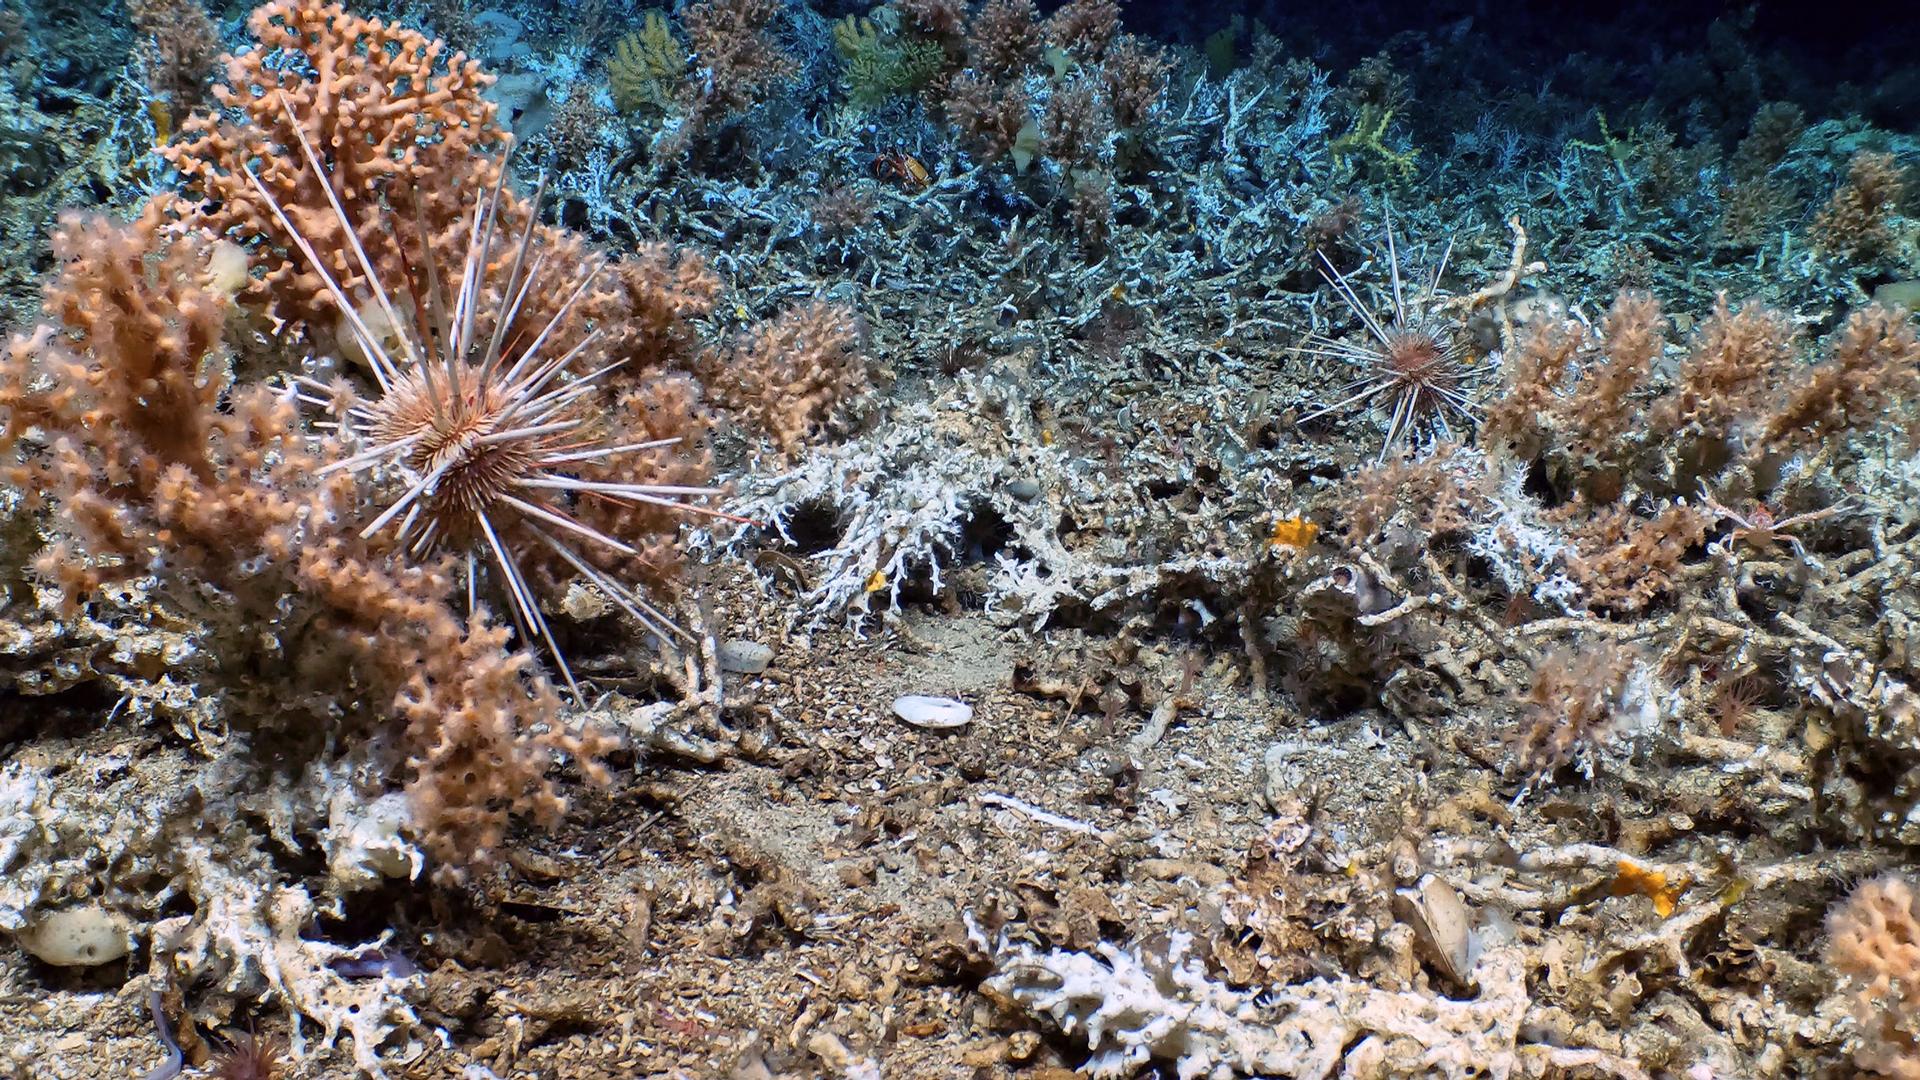 Urchin perch on live coral (left) with fossil coral, the foundation of the live reef, in the foreground, live reef in the background.